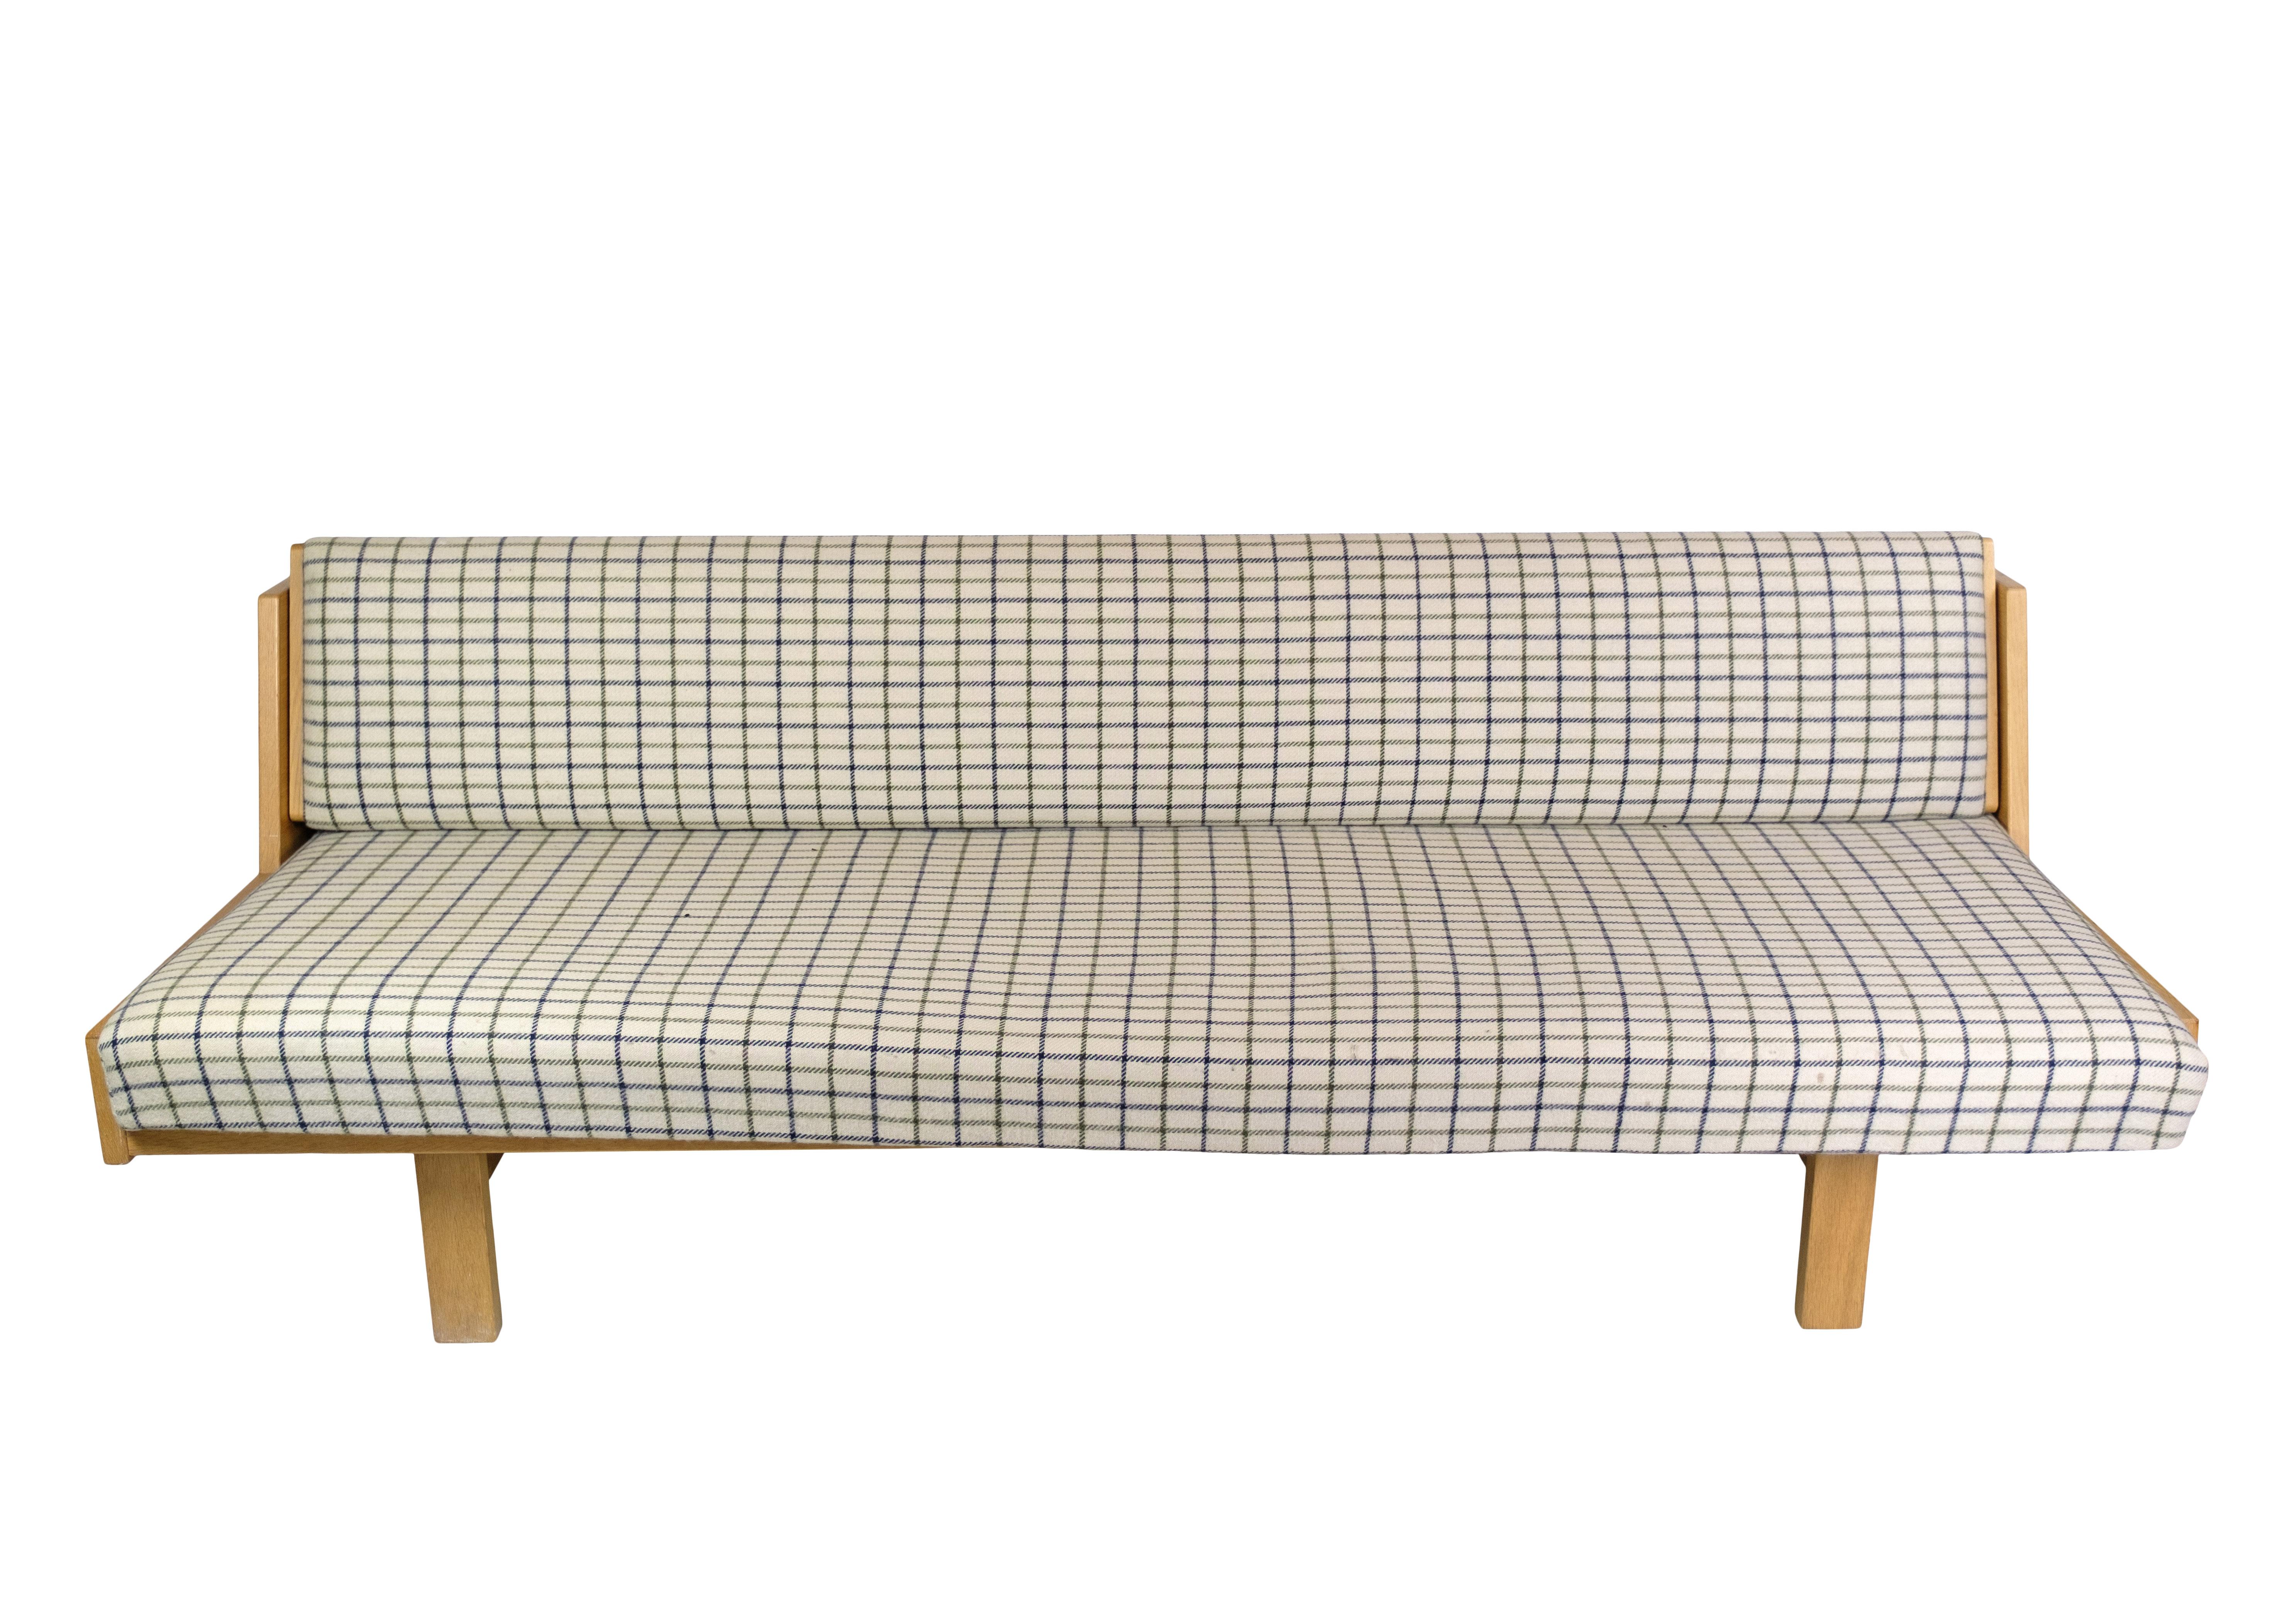 Hans J. Wegner's oak daybed / sofa is a unique design from around the 1960s, created with a timeless aesthetic and manufactured at Getama. It impresses with a nice solid oak frame and light fabric cushions with a charming checkered pattern. The sofa